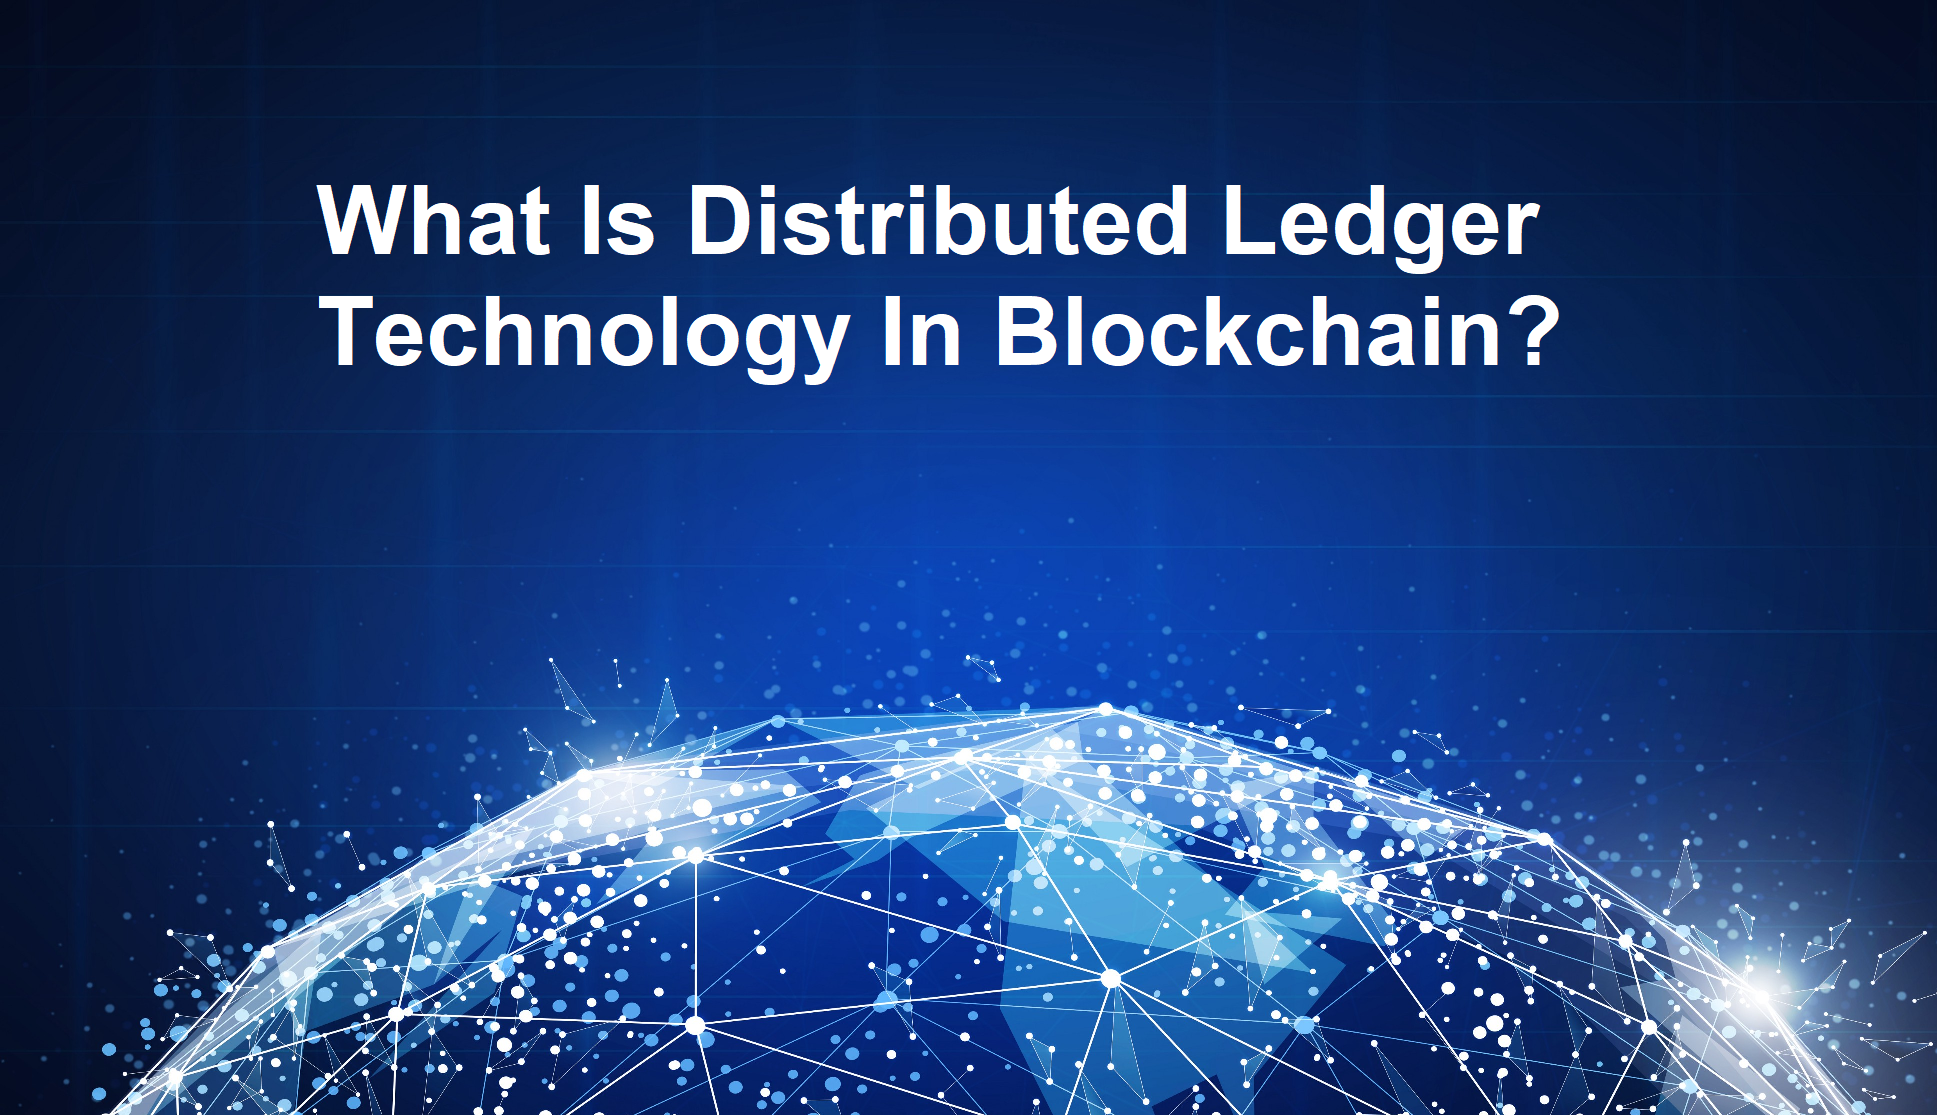 What Is Distributed Ledger Technology In Blockchain?